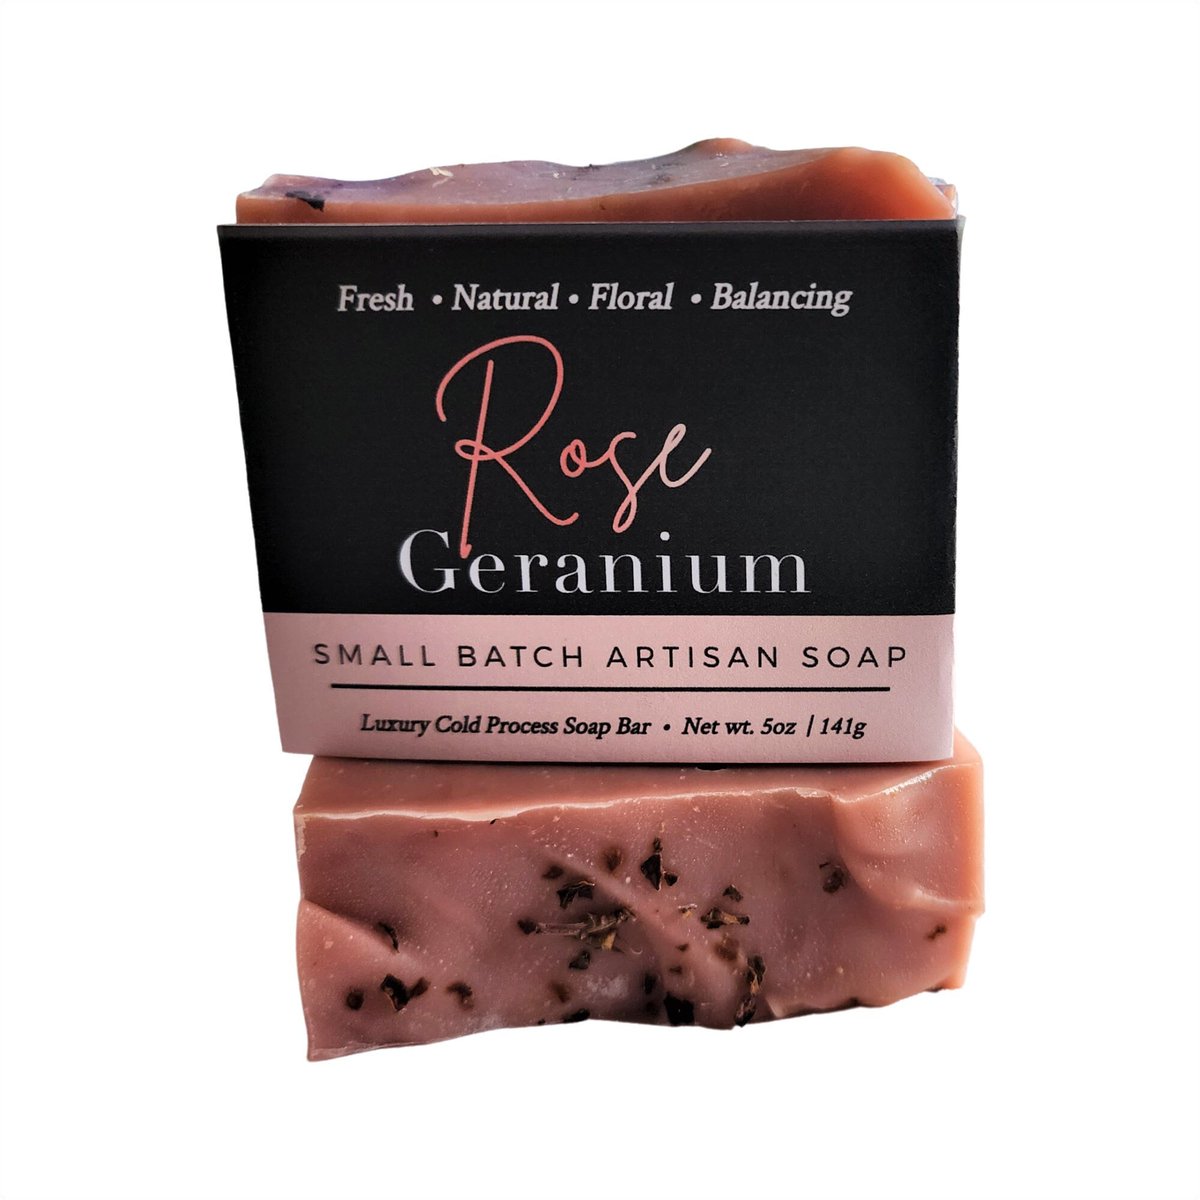 Rose Soap, Geranium Soap, Rose Geranium Soap, Natural Soap, Cold Process Soap, Soap Gift, Vegan Soap, Pink Clay Soap, , Valentine's Day Gift tuppu.net/d58d6682 #Christmasgifts #shopsmall #selfcare #Etsy #Soapgift #handmadesoap #vegan #gifts #SoapSale